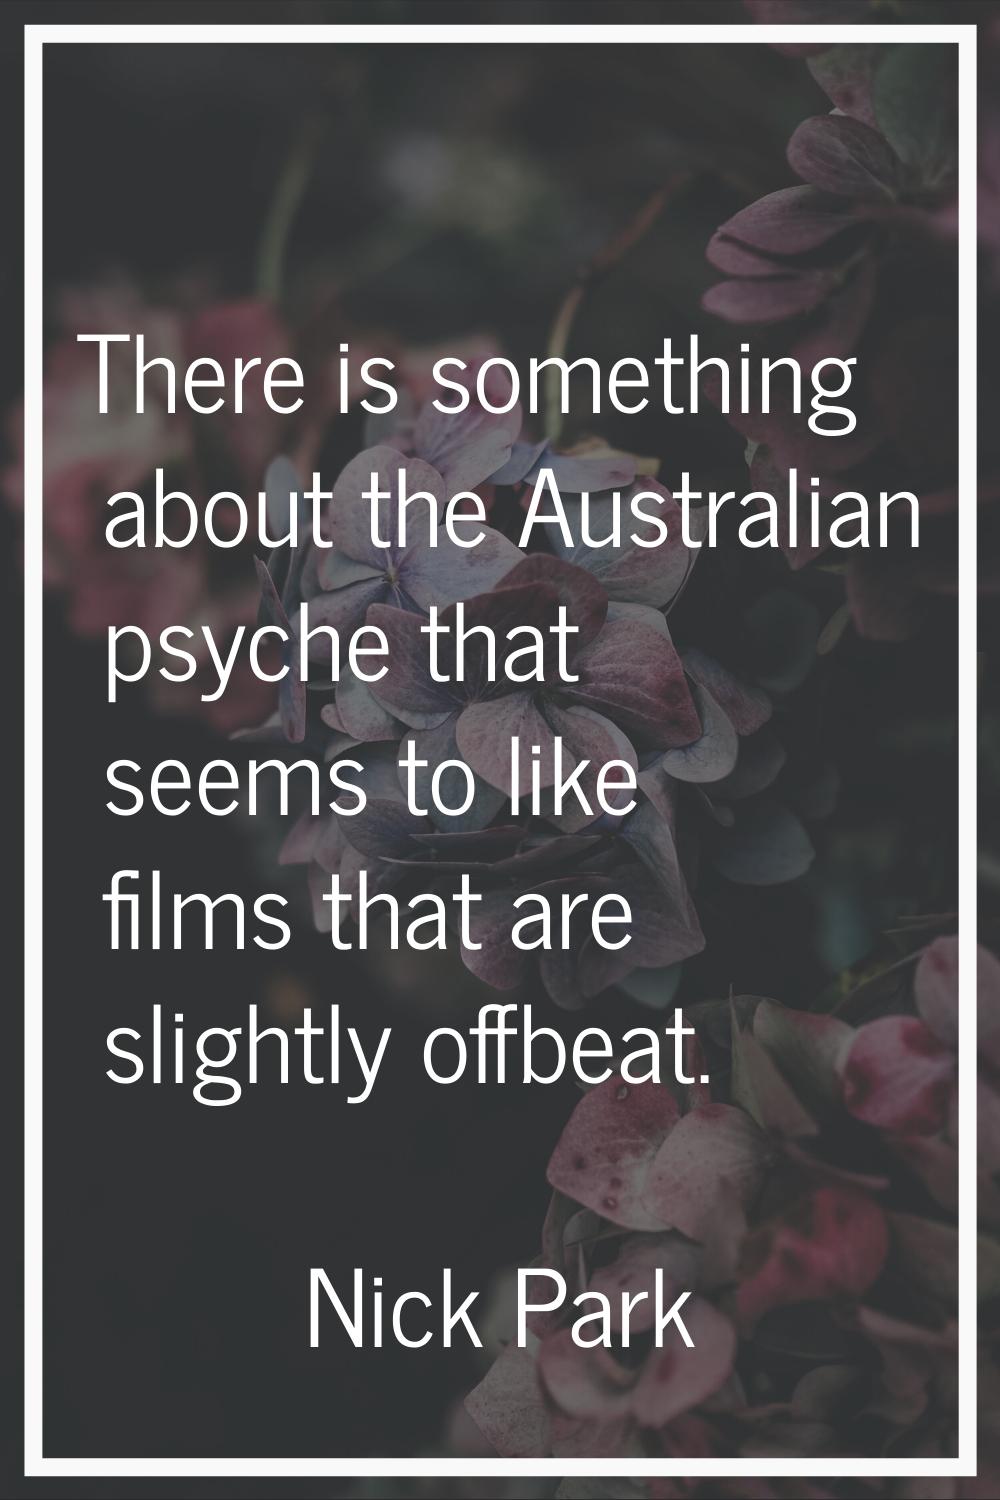 There is something about the Australian psyche that seems to like films that are slightly offbeat.